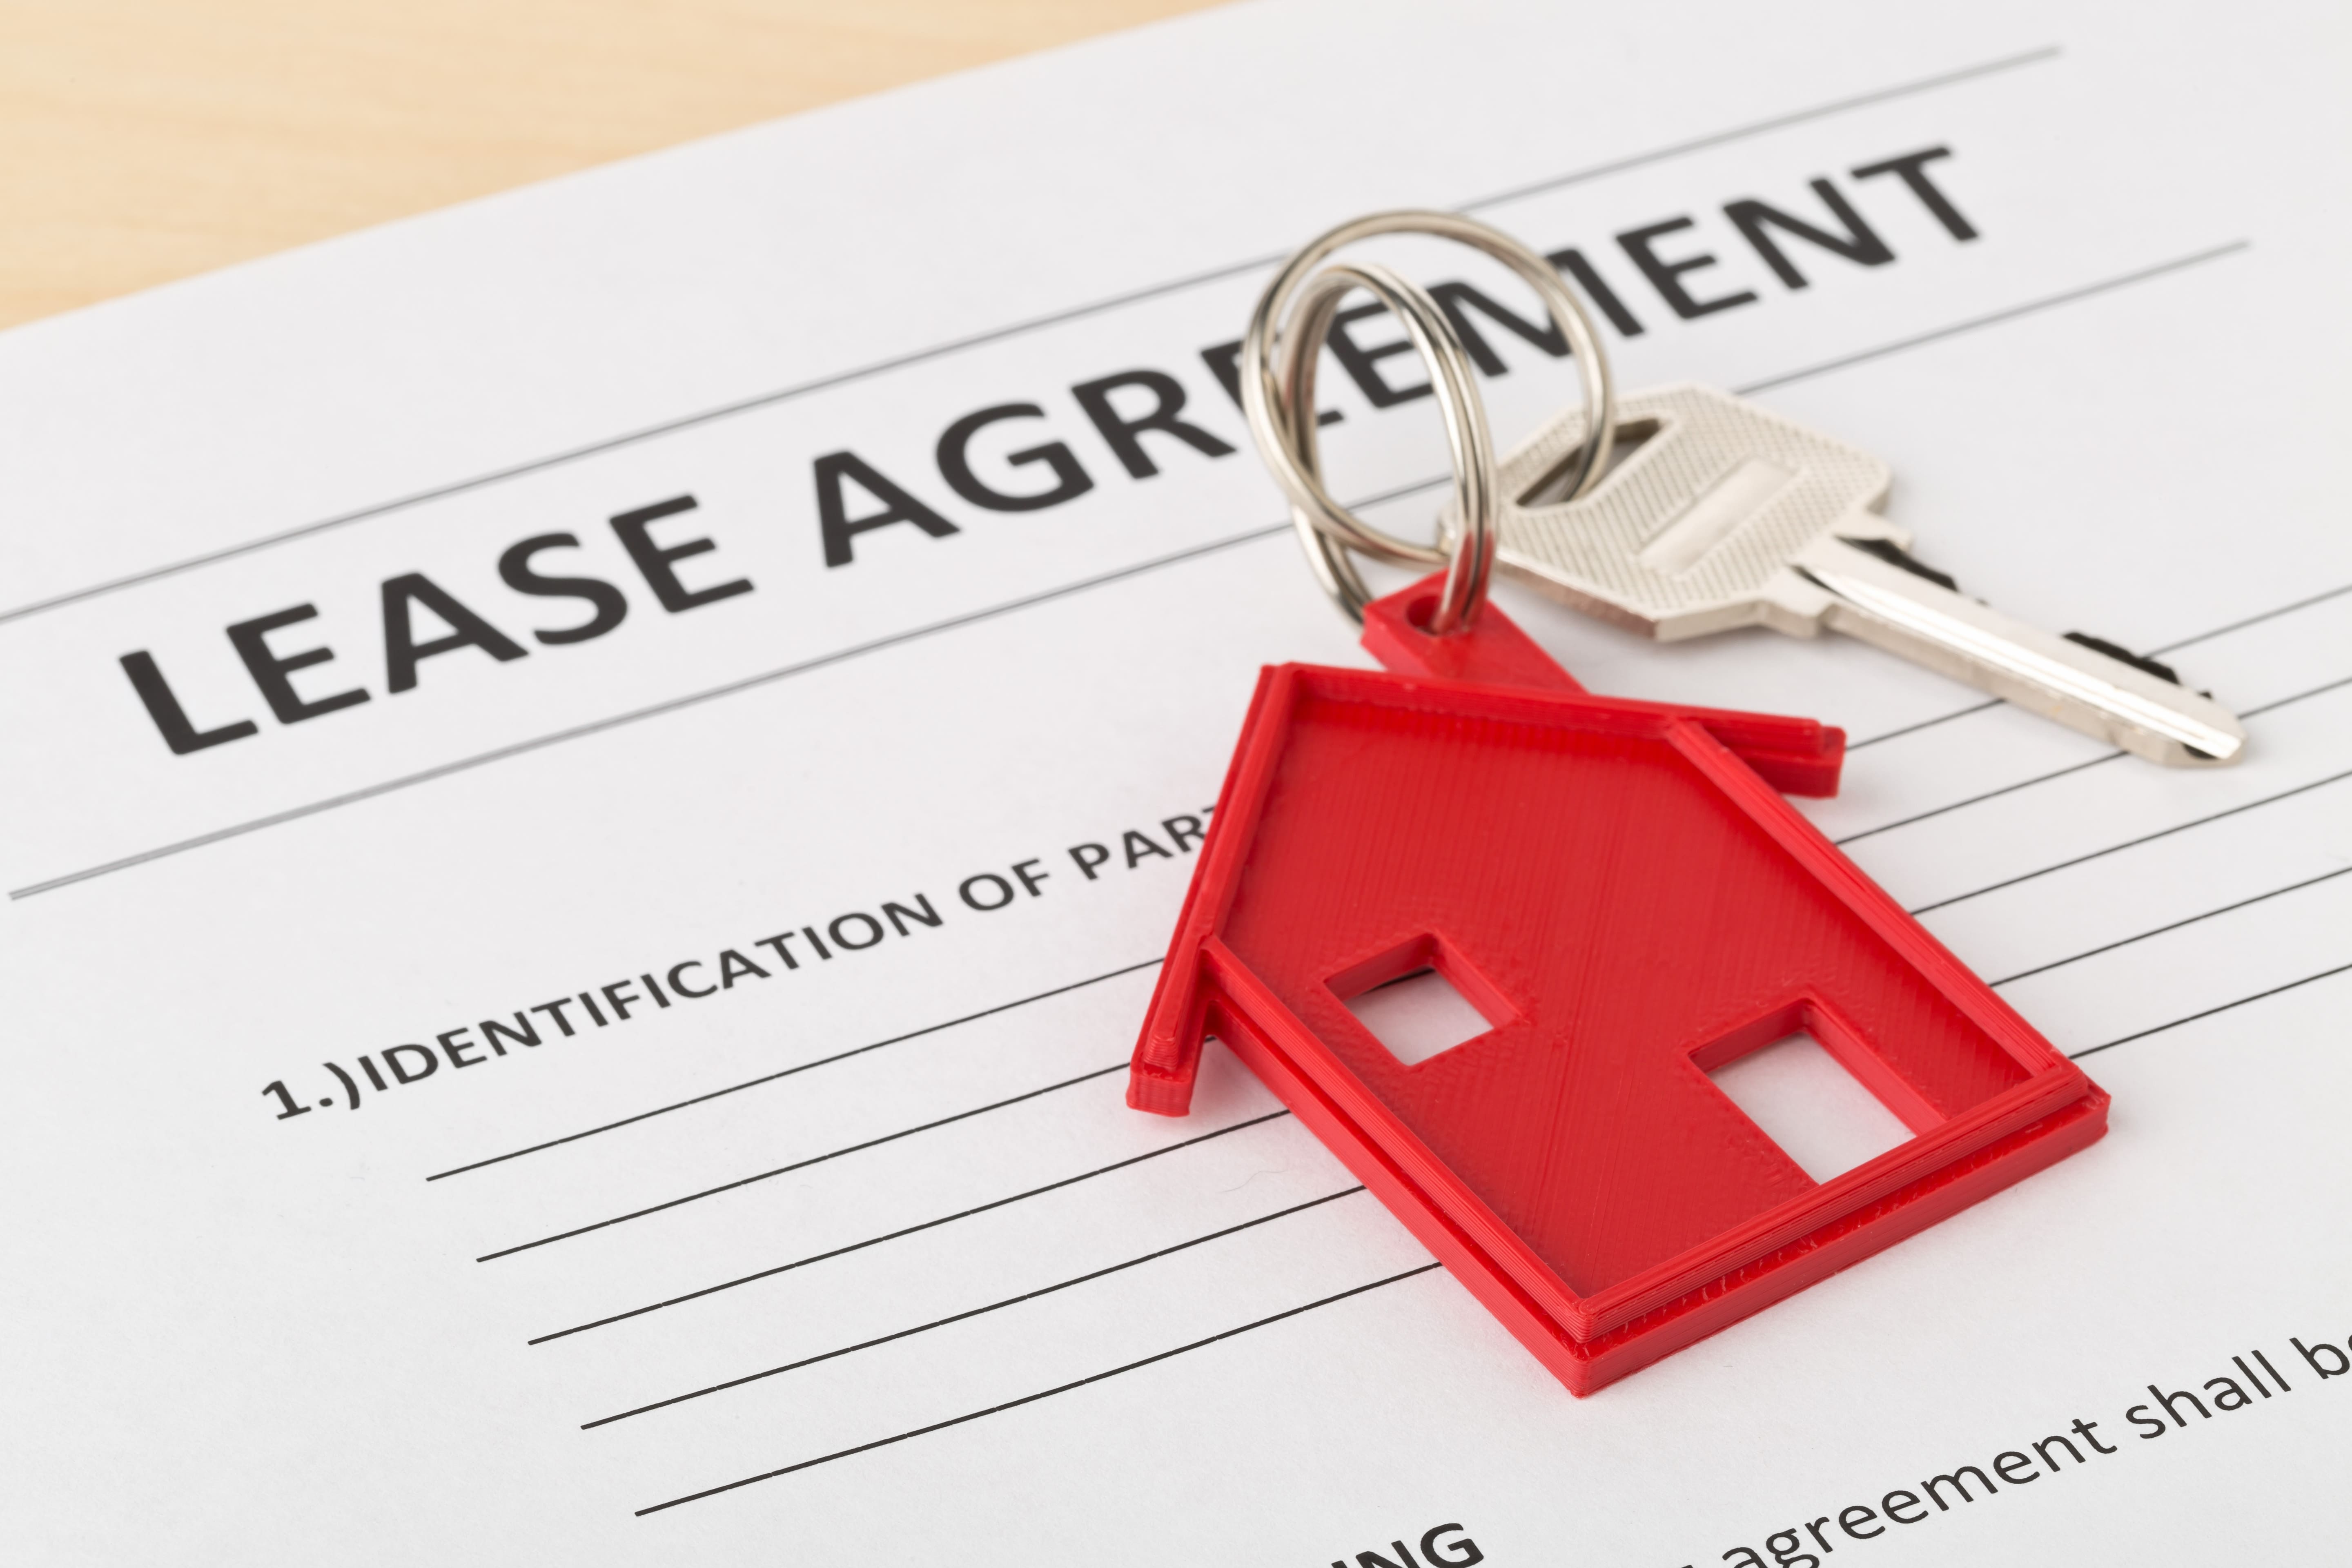 Who Should Sign a Lease Agreement for a Pleasanton Rental Property?